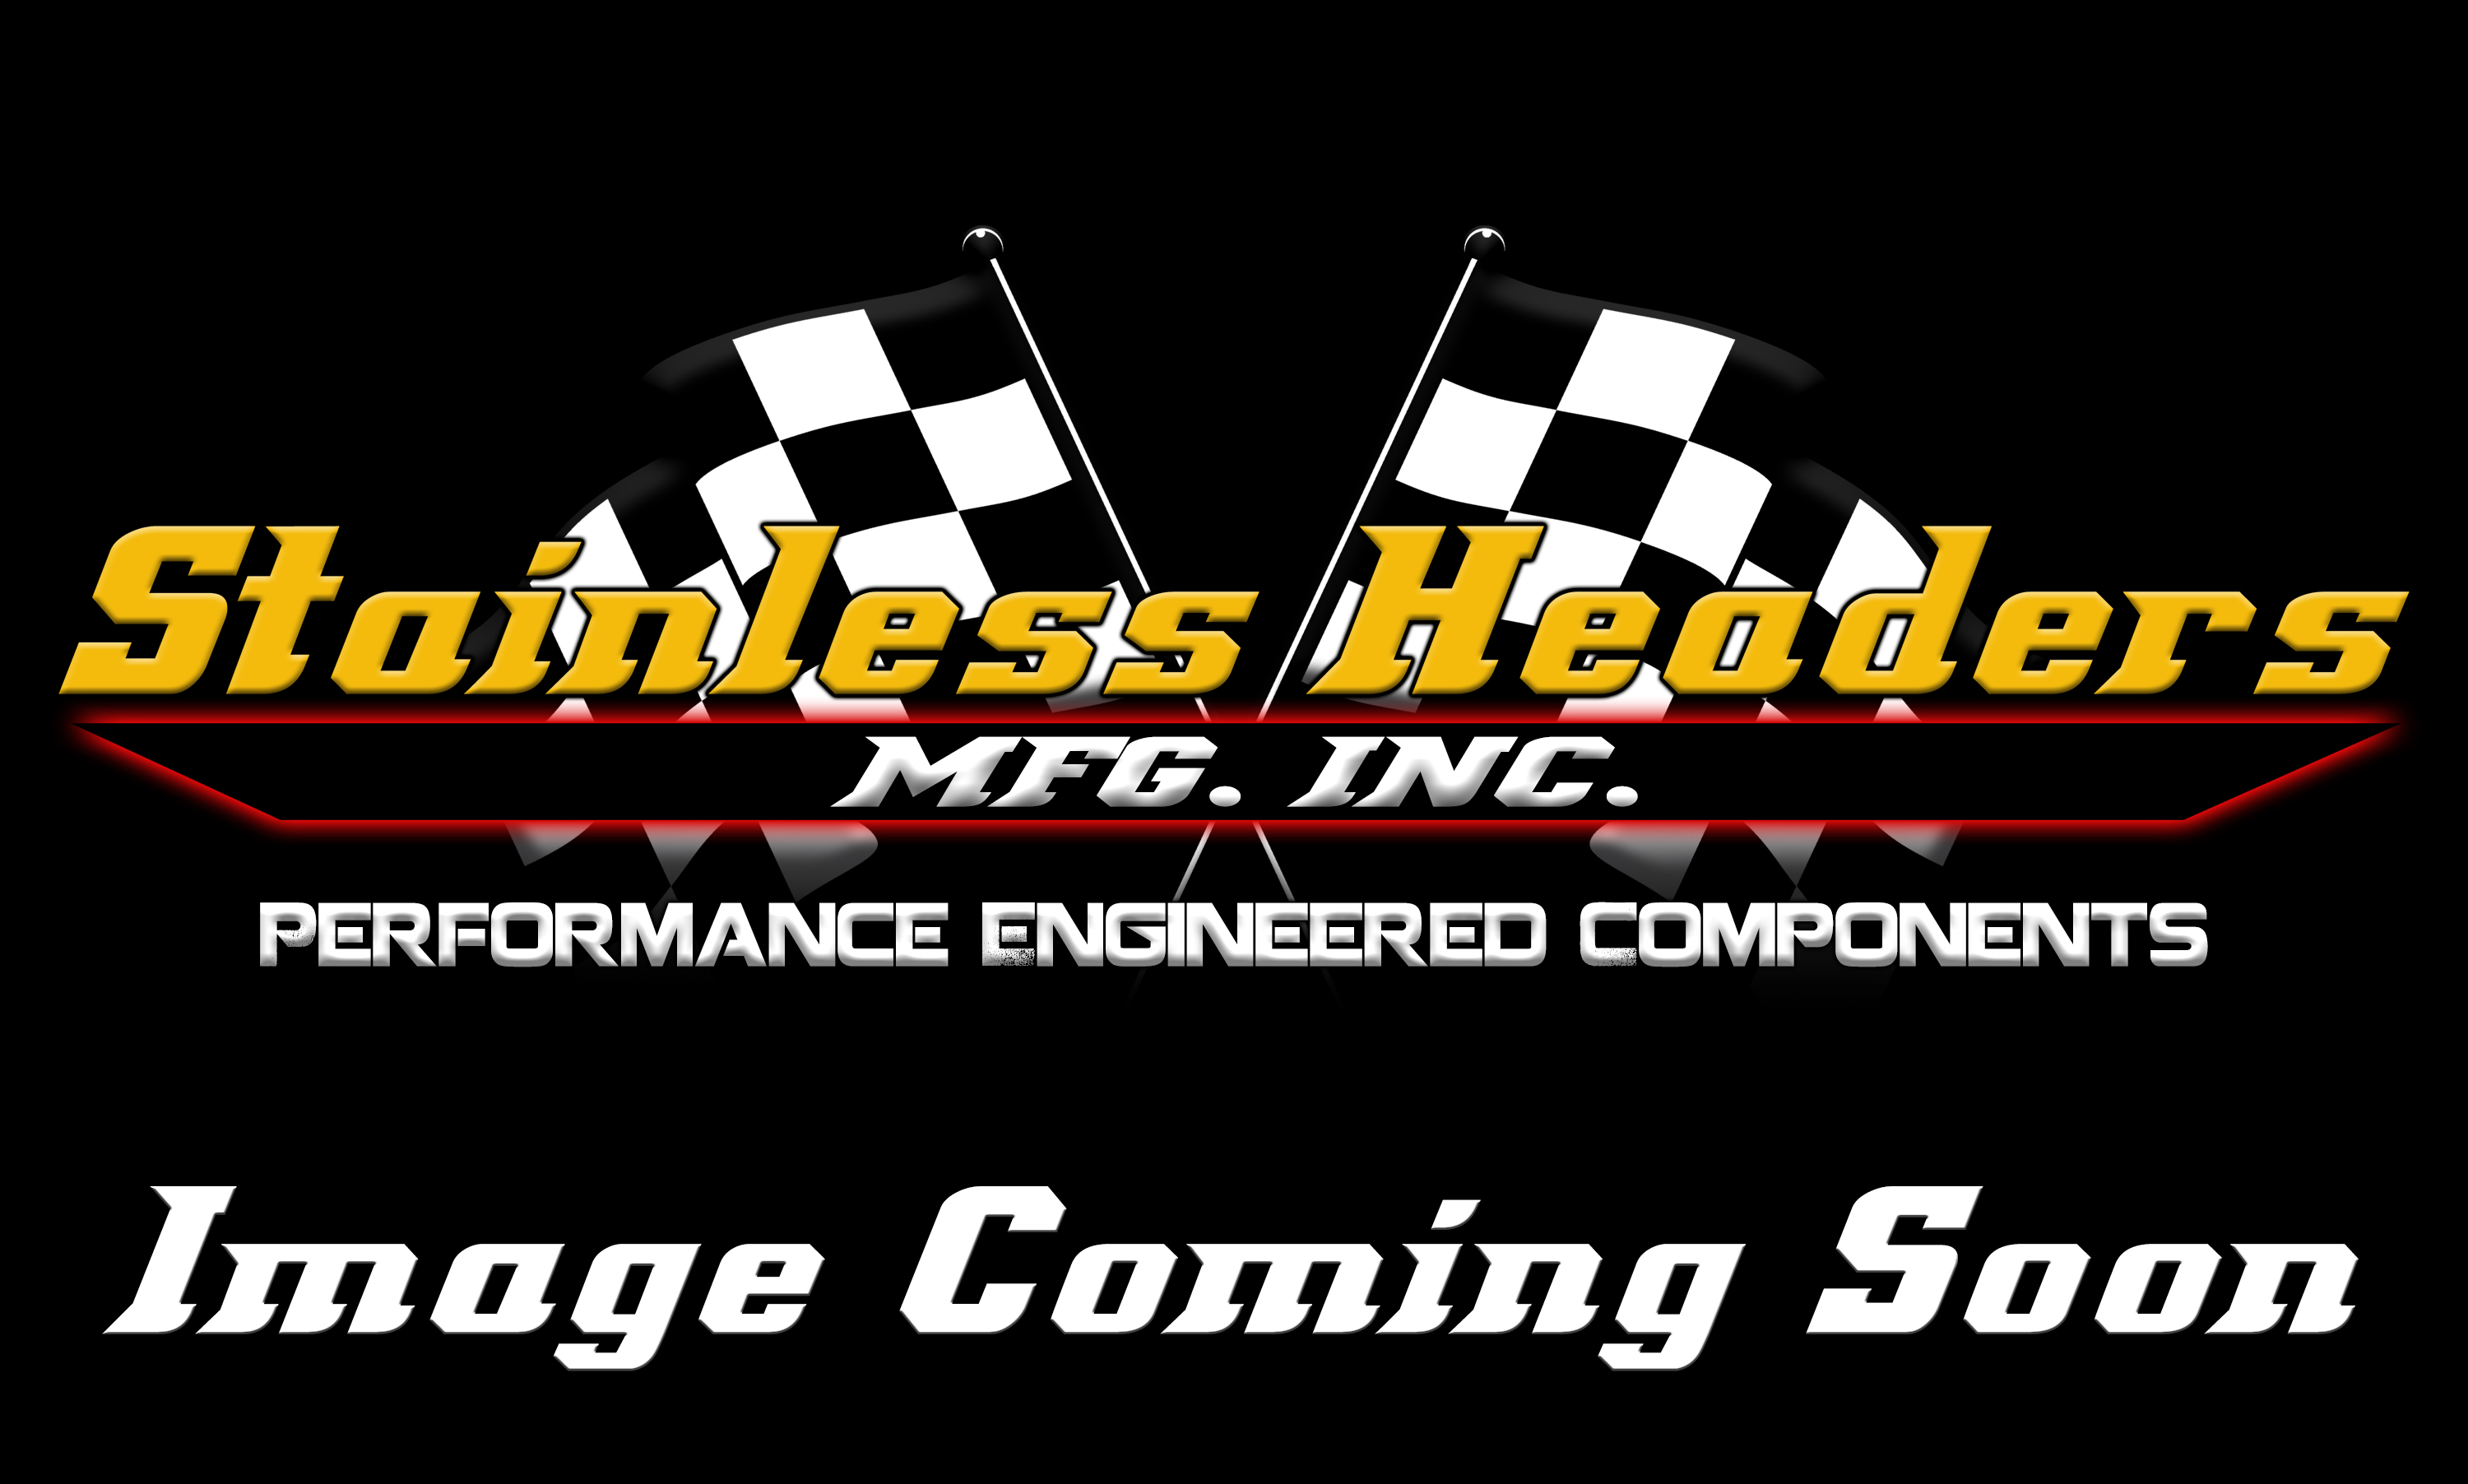 CompTurbo Technology Turbochargers - Comp Turbo Journal Bearing Turbochargers - CompTurbo Technologies - CTR4002H-6875 Reverse Rotation 360 Journal Bearing Turbocharger (1150 HP)